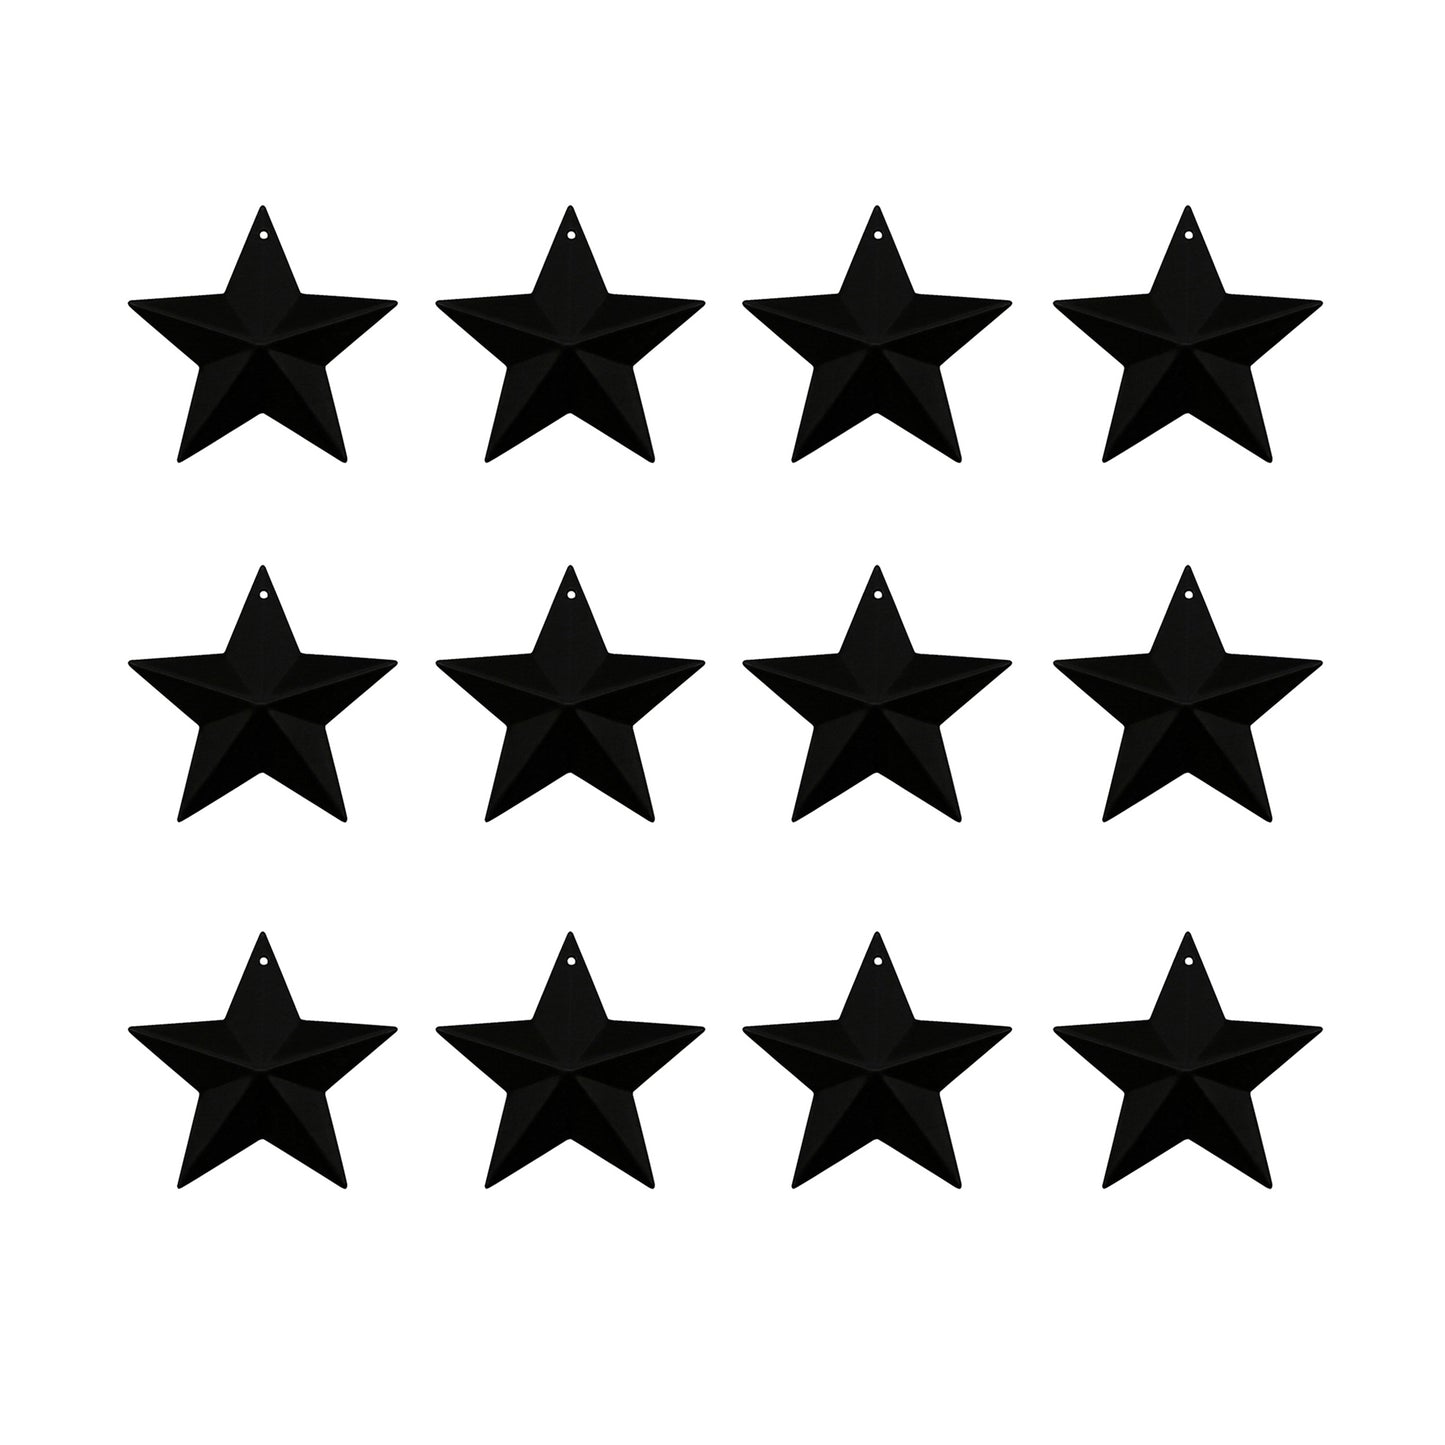 CVHOMEDECO. Country Rustic Primitive Vintage Gifts Black Small Metal Barn Star Wall/Door Decor, 2.5 Inch, Set of 12.